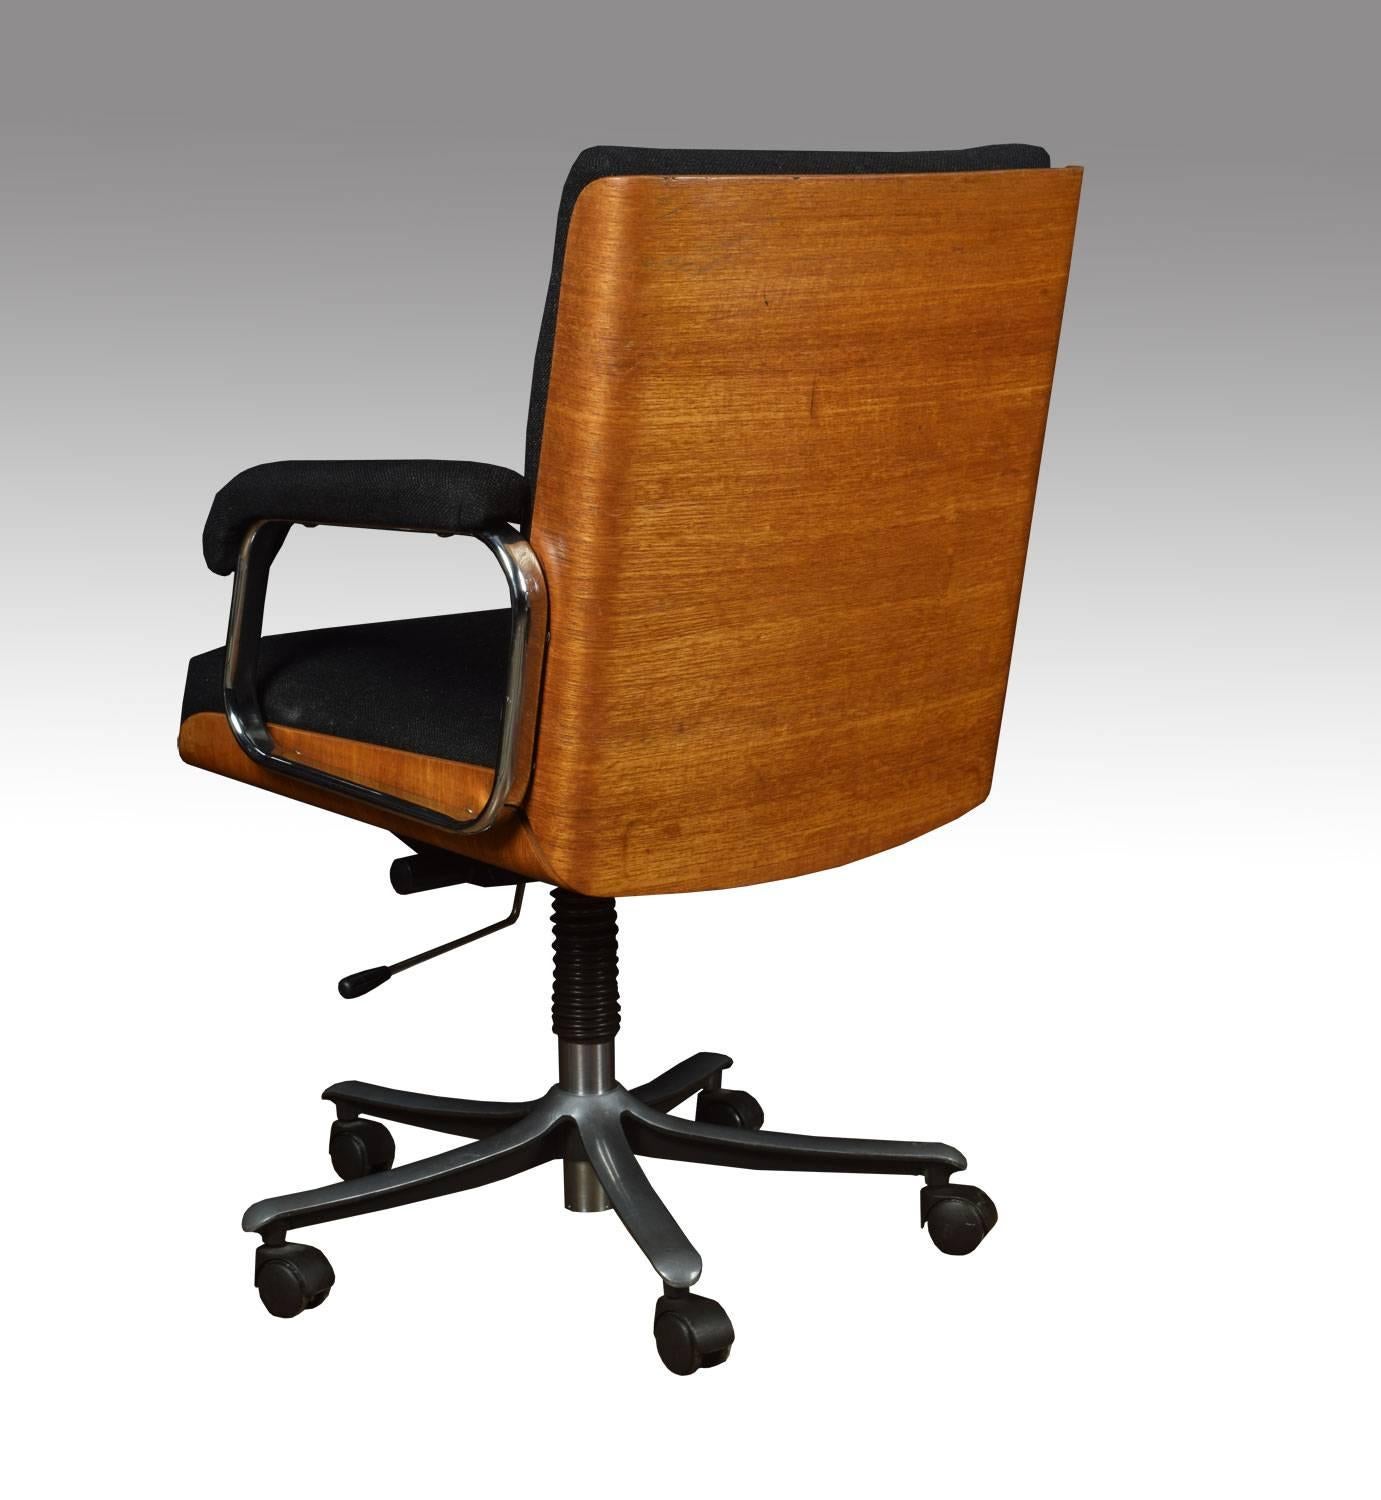 Eames style swivel office chair, the black upholstered back, seat and arms on bentwood frame with chromed metal swivel base

Dimensions
Height 37 Inches, height to seat 21 Inches
Width 25.5 Inches
Depth 25 Inches.